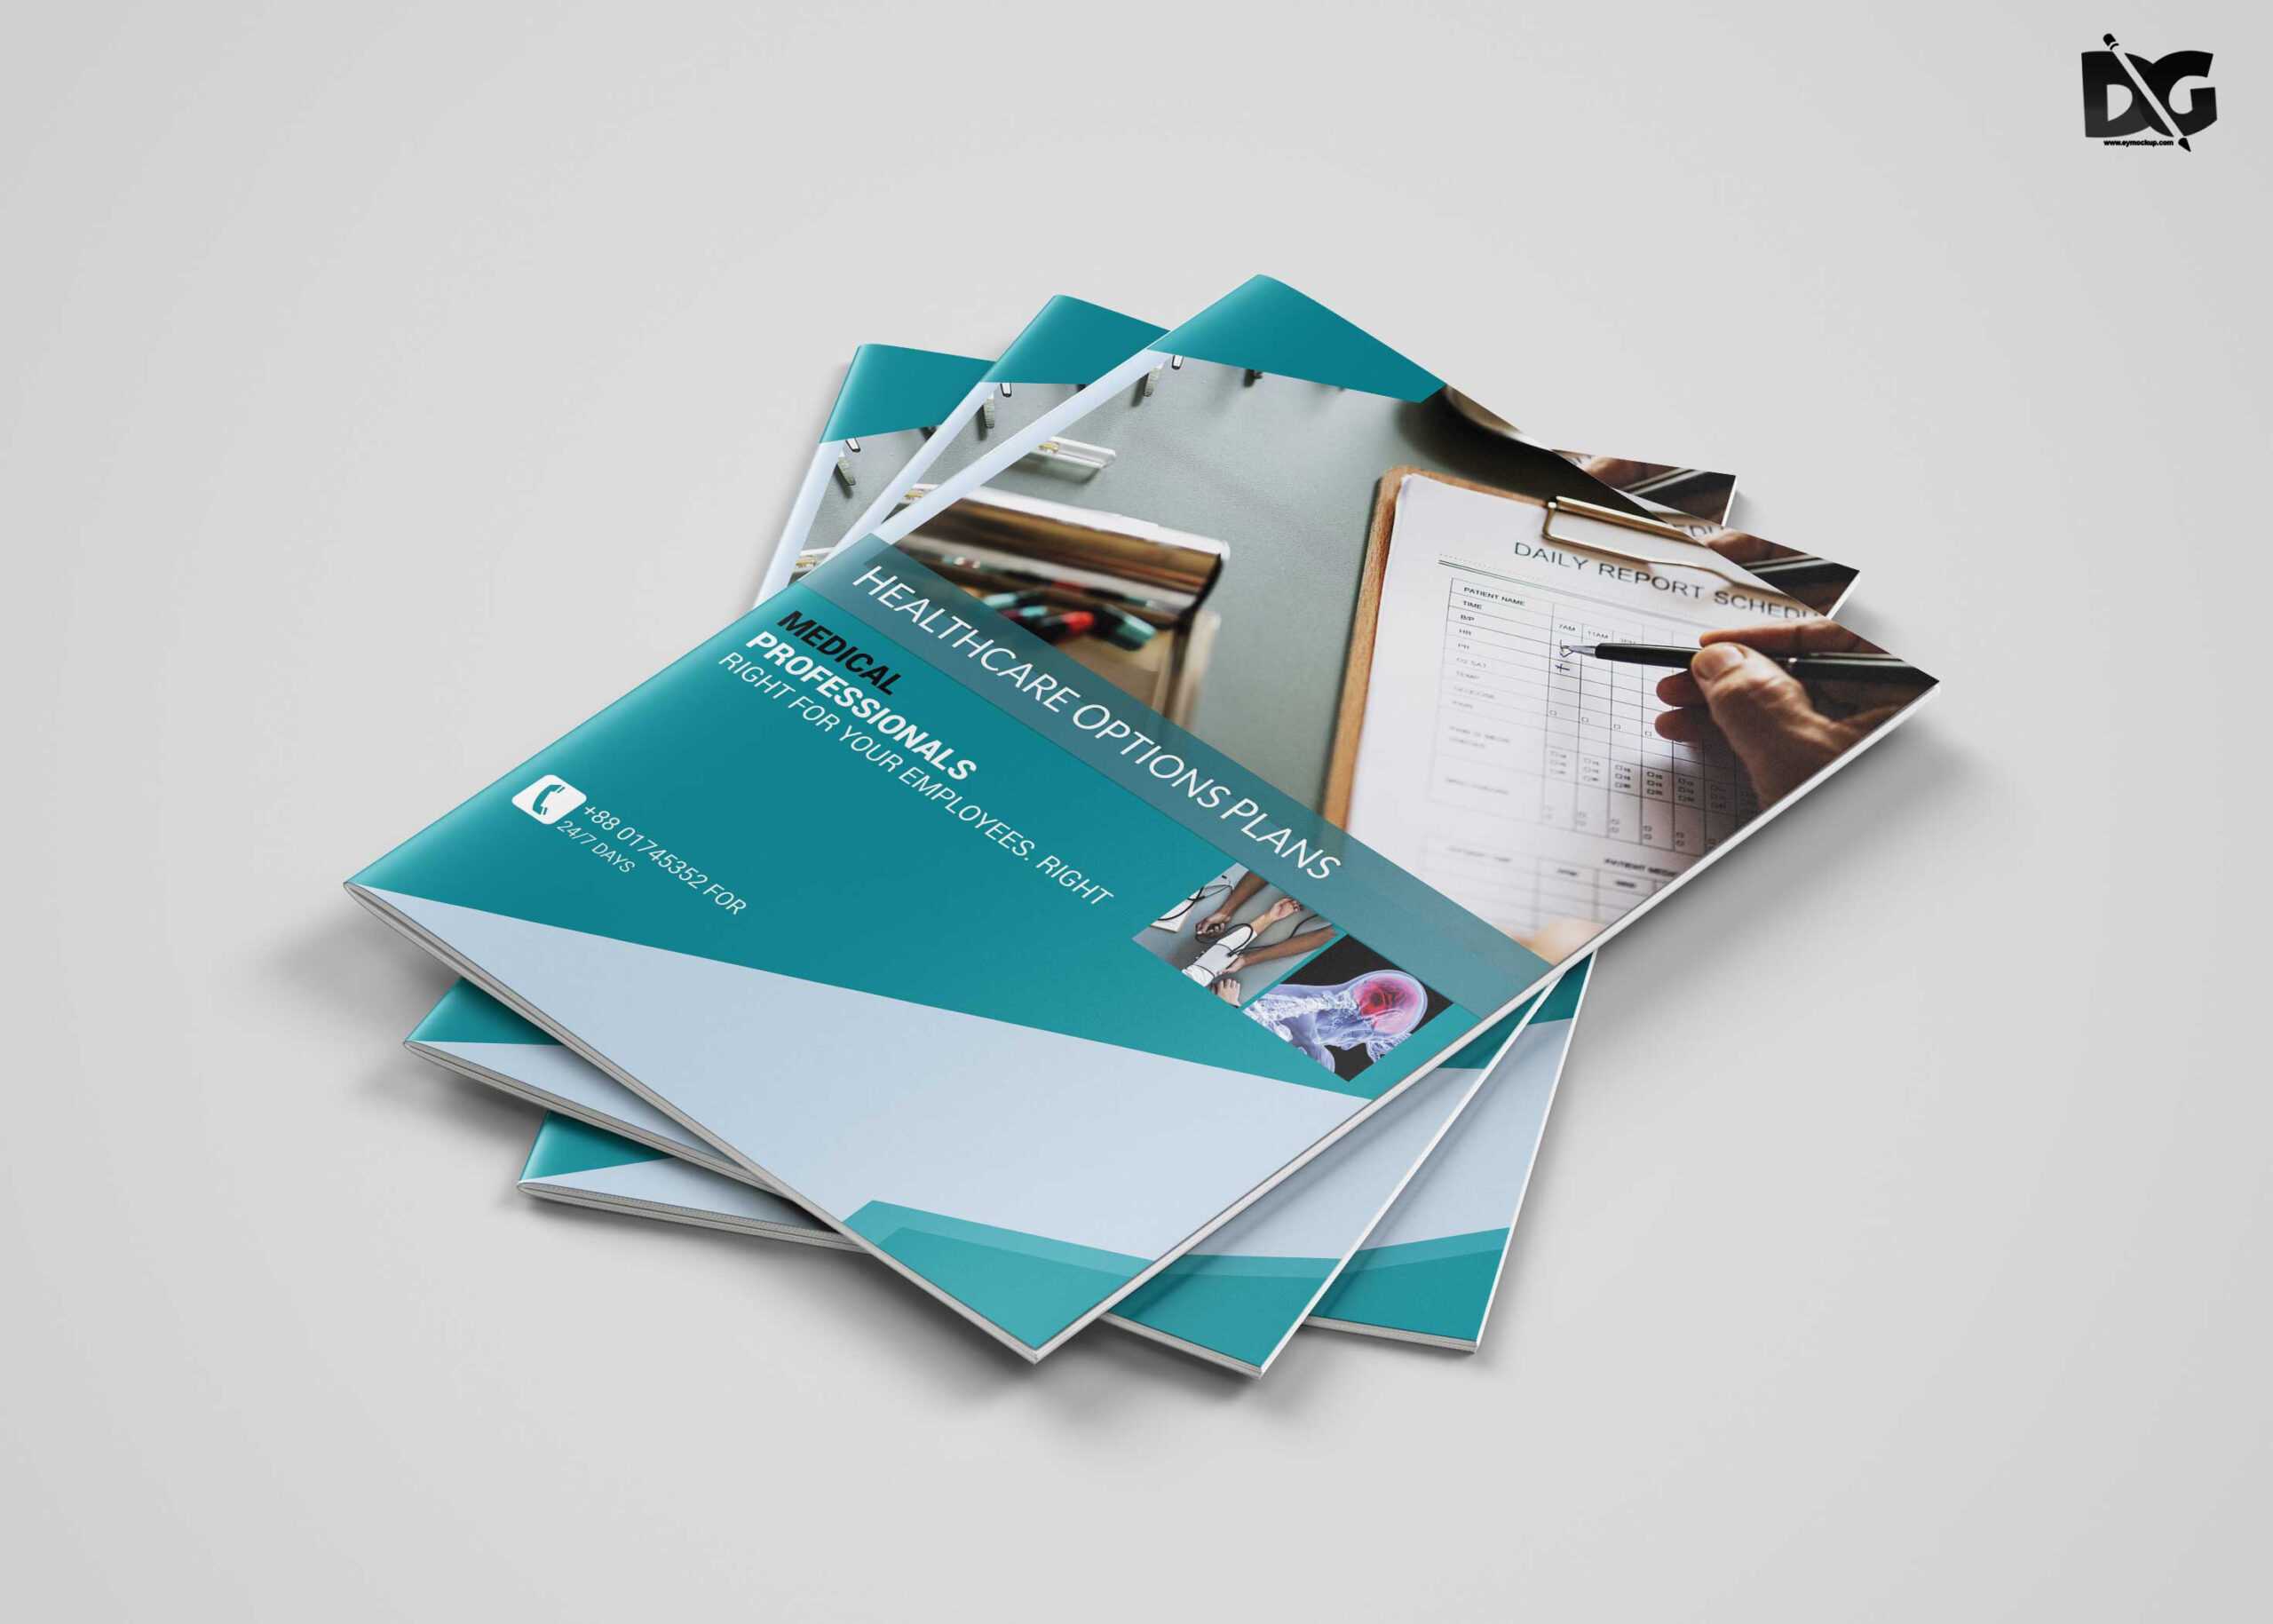 Free Download Health Care A4 Brochure Template | Free Psd Mockup Inside Healthcare Brochure Templates Free Download